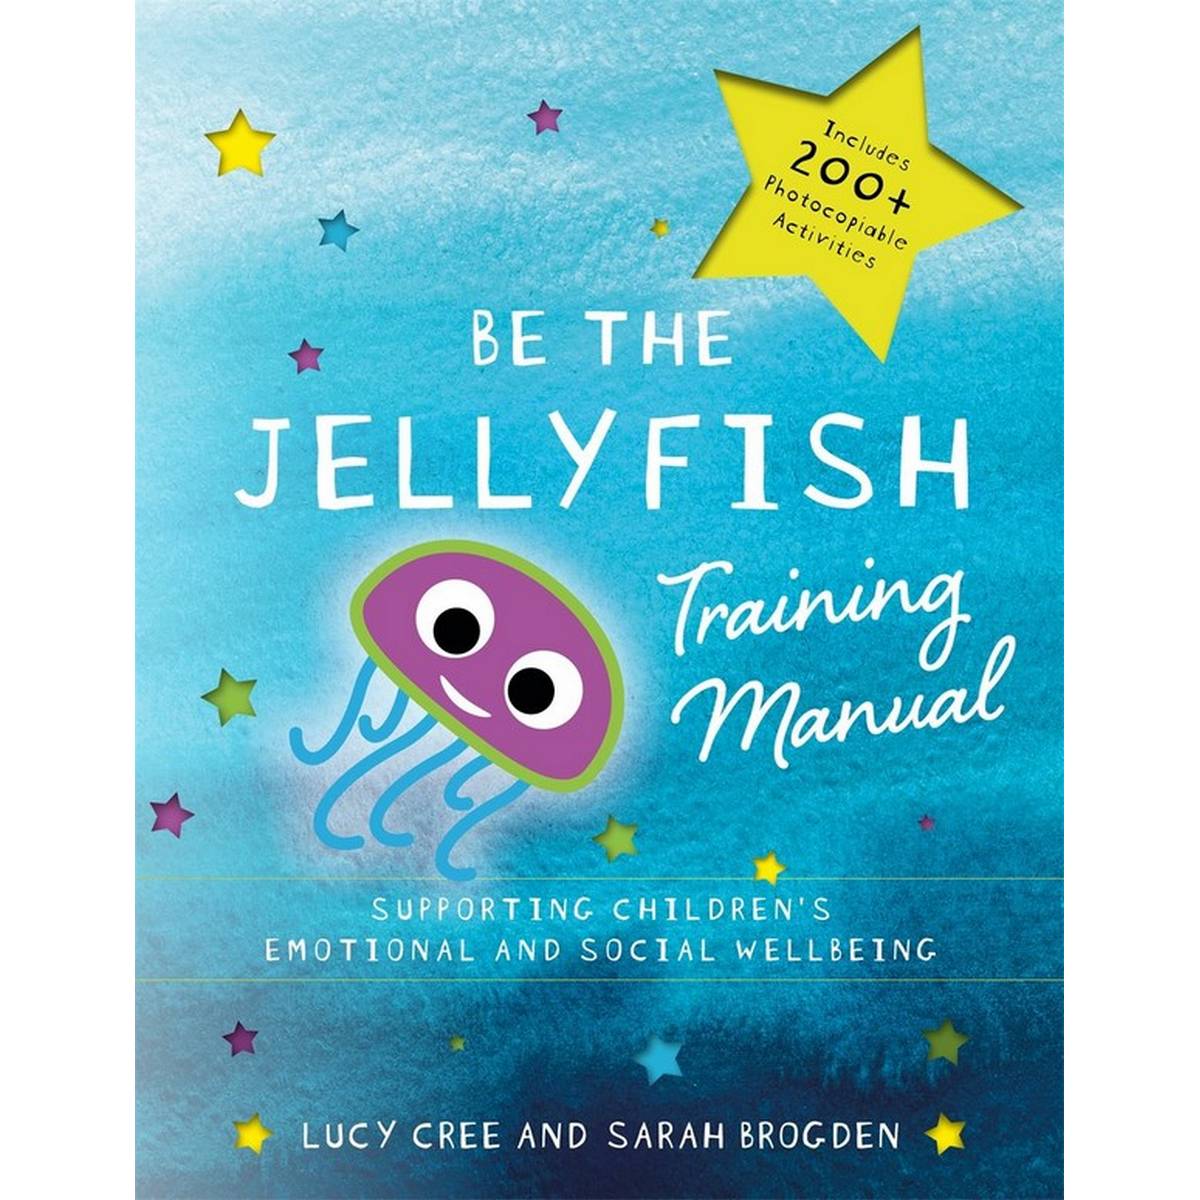 Be the Jellyfish Training Manual: Supporting Children's Social and Emotional Wellbeing